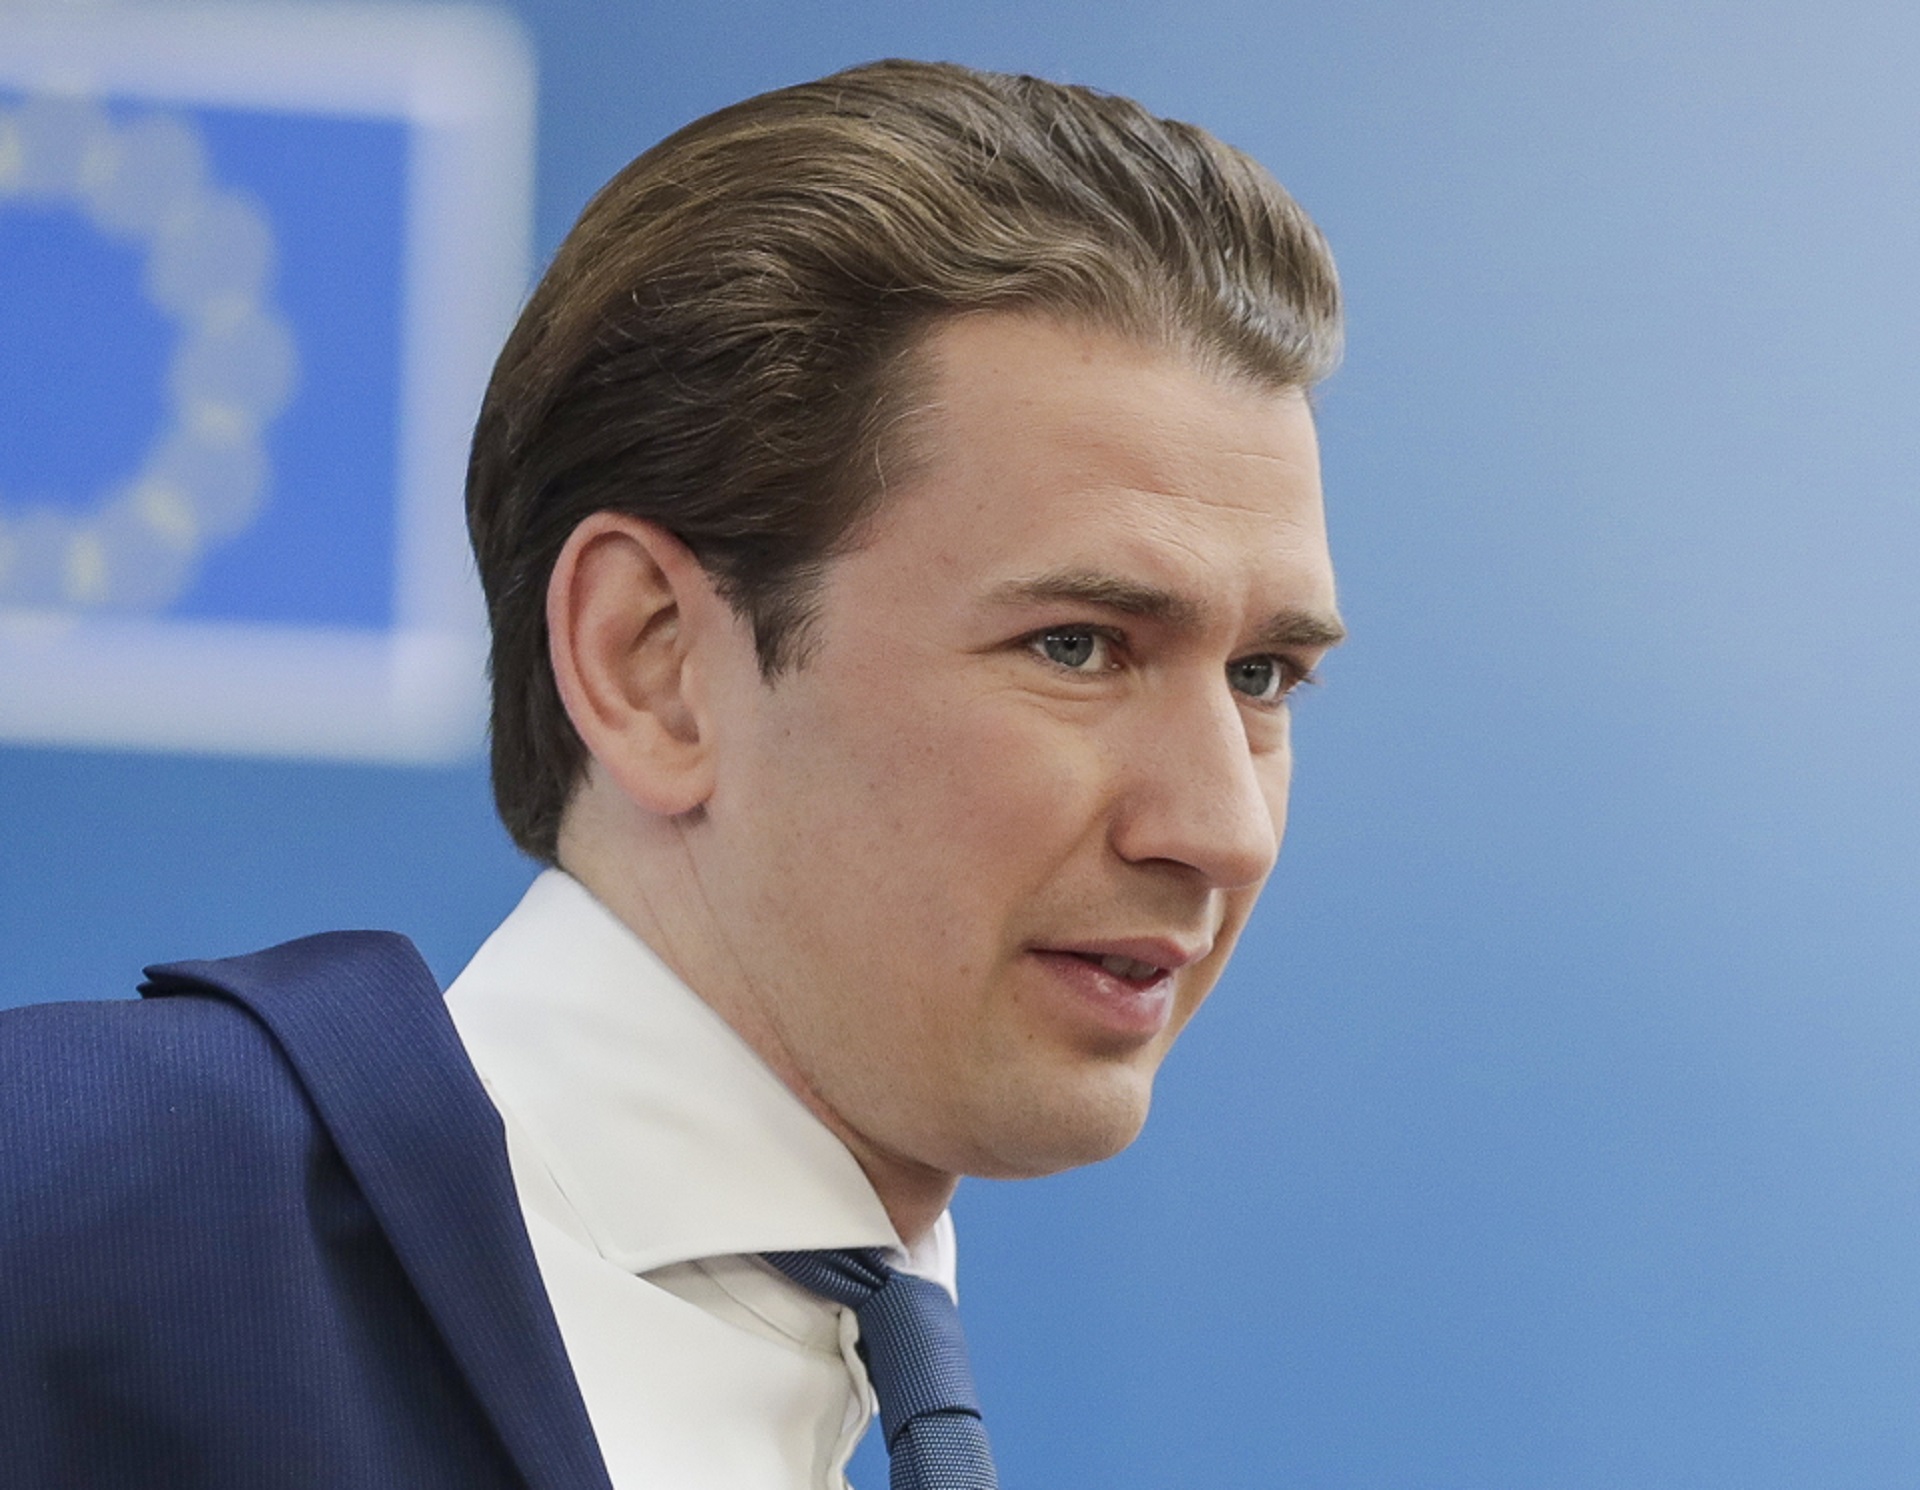 epa08556517 Austrian Chancellor Sebastian Kurz arrives for the fourth day of the European Council meeting in Brussels, Belgium, 20 July 2020. European Union nations leaders meet face-to-face for a fourth day to discuss plans responding to coronavirus crisis and new long-term EU budget.  EPA/STEPHANIE LECOCQ / POOL